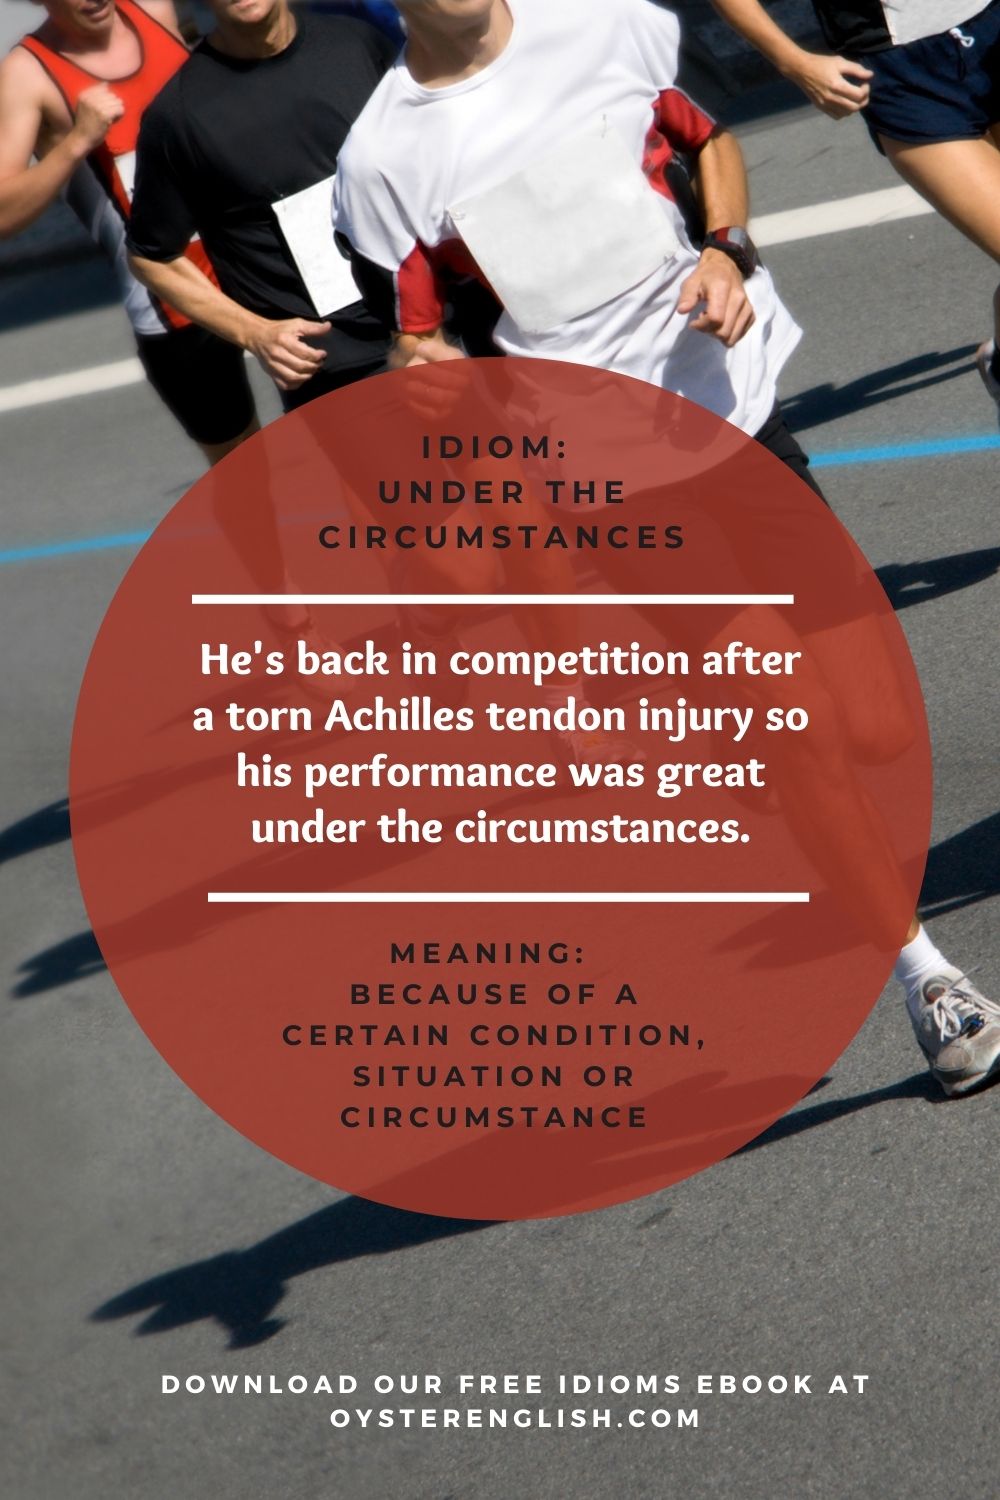 Image of runners in a road race and definition of "under the circumstances." Caption: He's back in competition after a torn Achilles tendon injury so his performance was great under the circumstances.